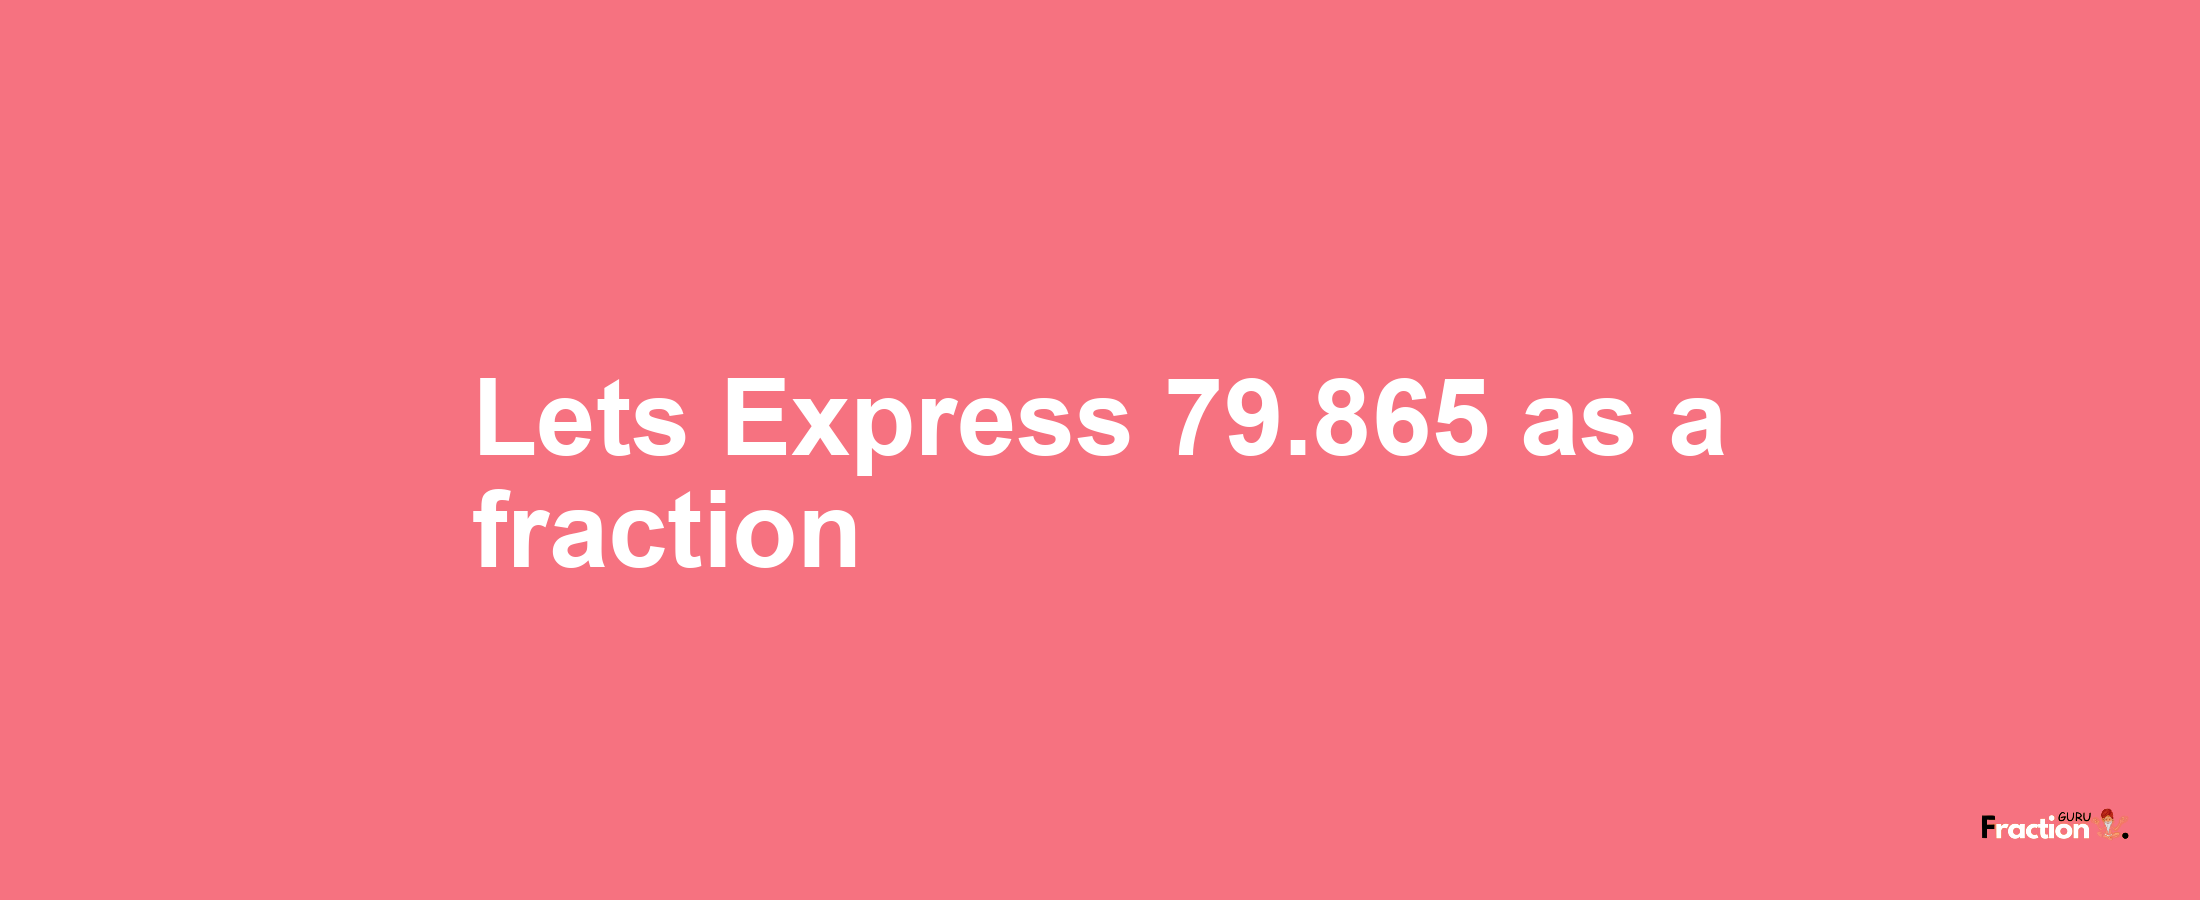 Lets Express 79.865 as afraction